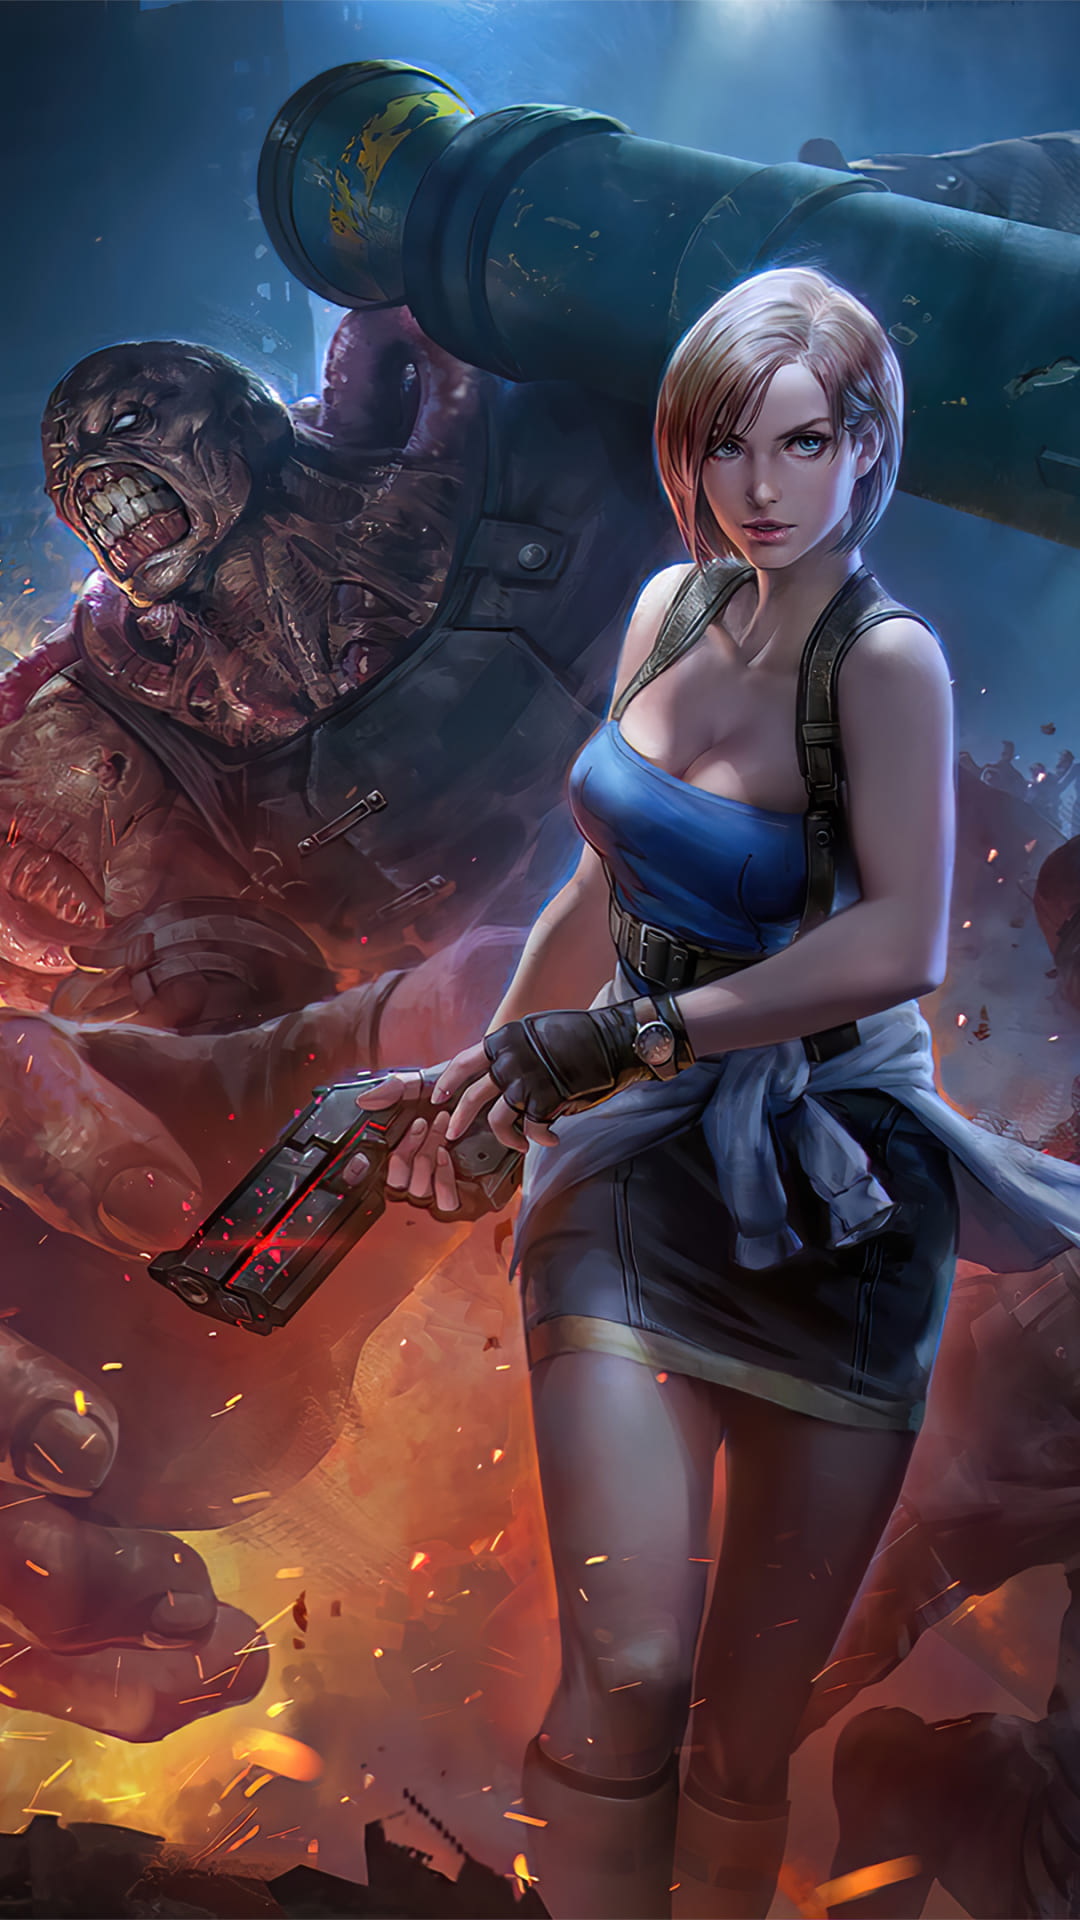 Resident Evil 3 Background Iphone